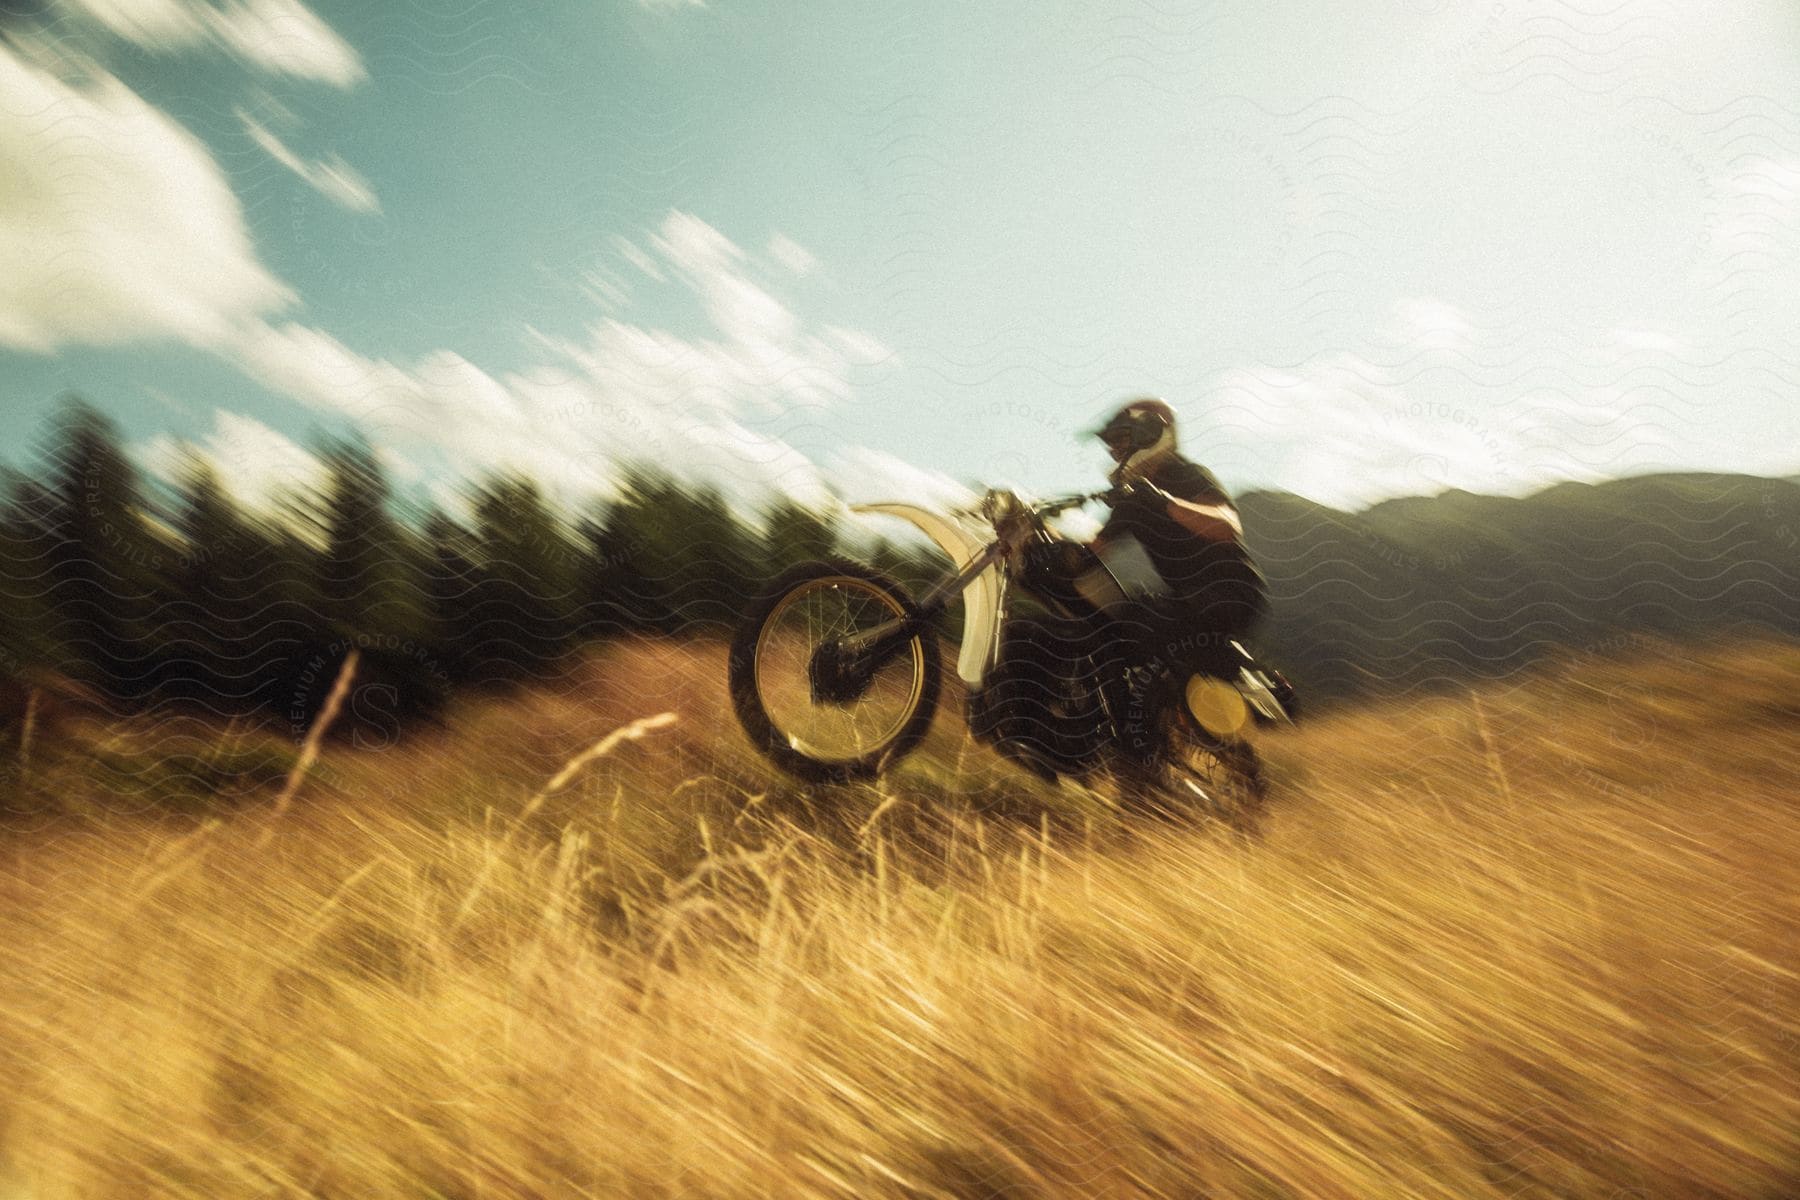 A person doing a wheelie on a dirt bike out in a field.